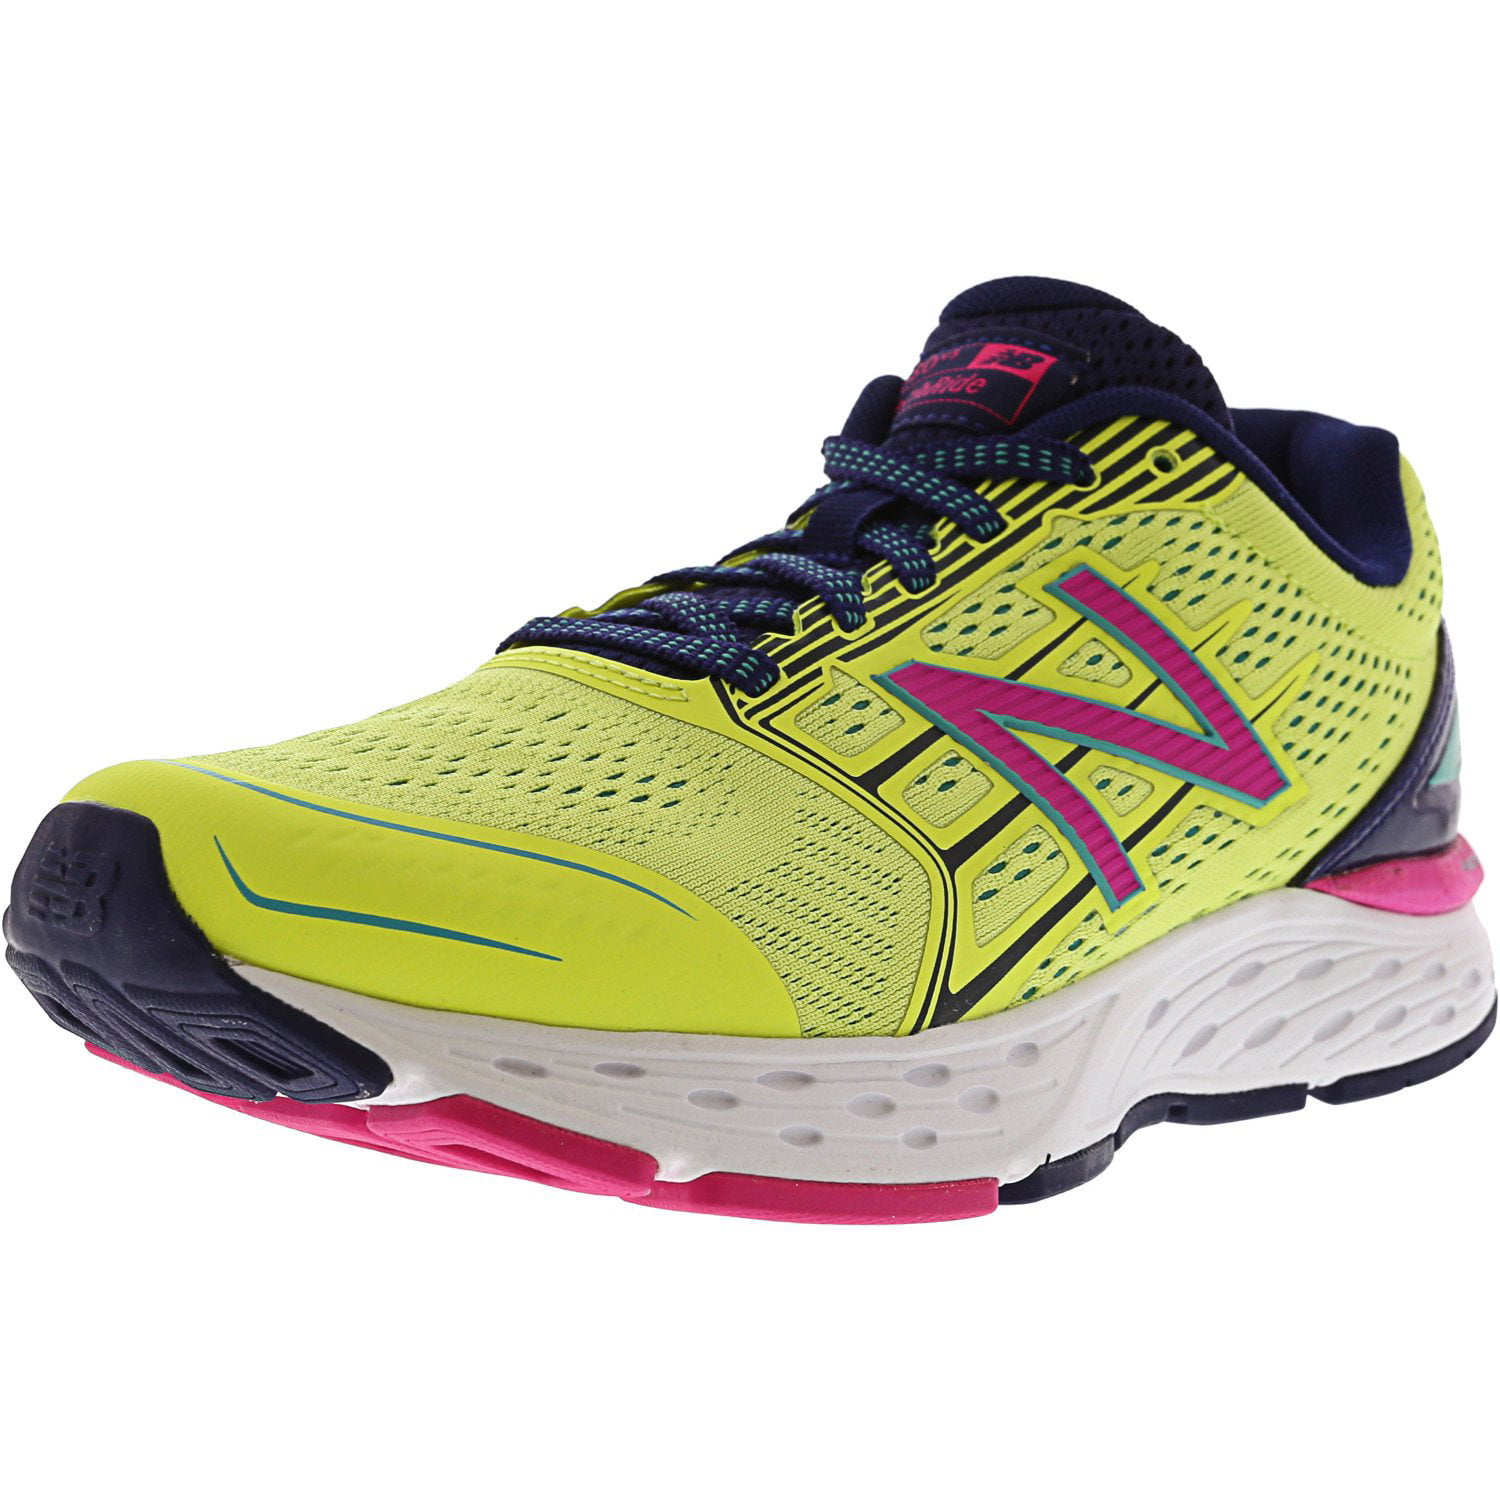 W680 Cm5 Ankle-High Running Shoe - 8.5 